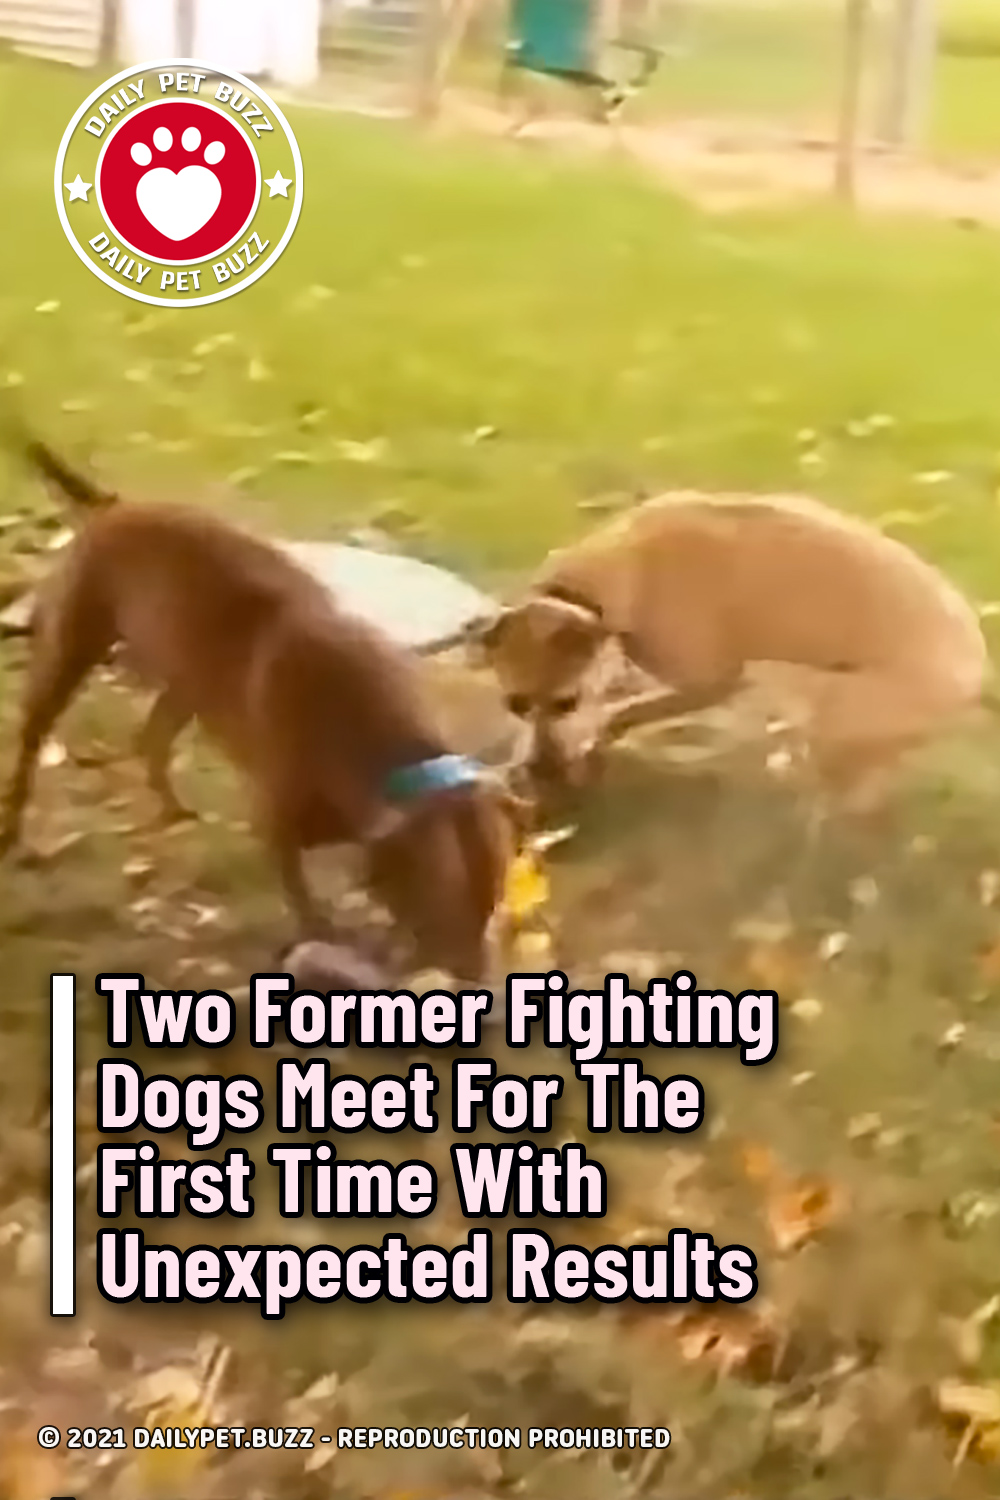 Two Former Fighting Dogs Meet For The First Time With Unexpected Results